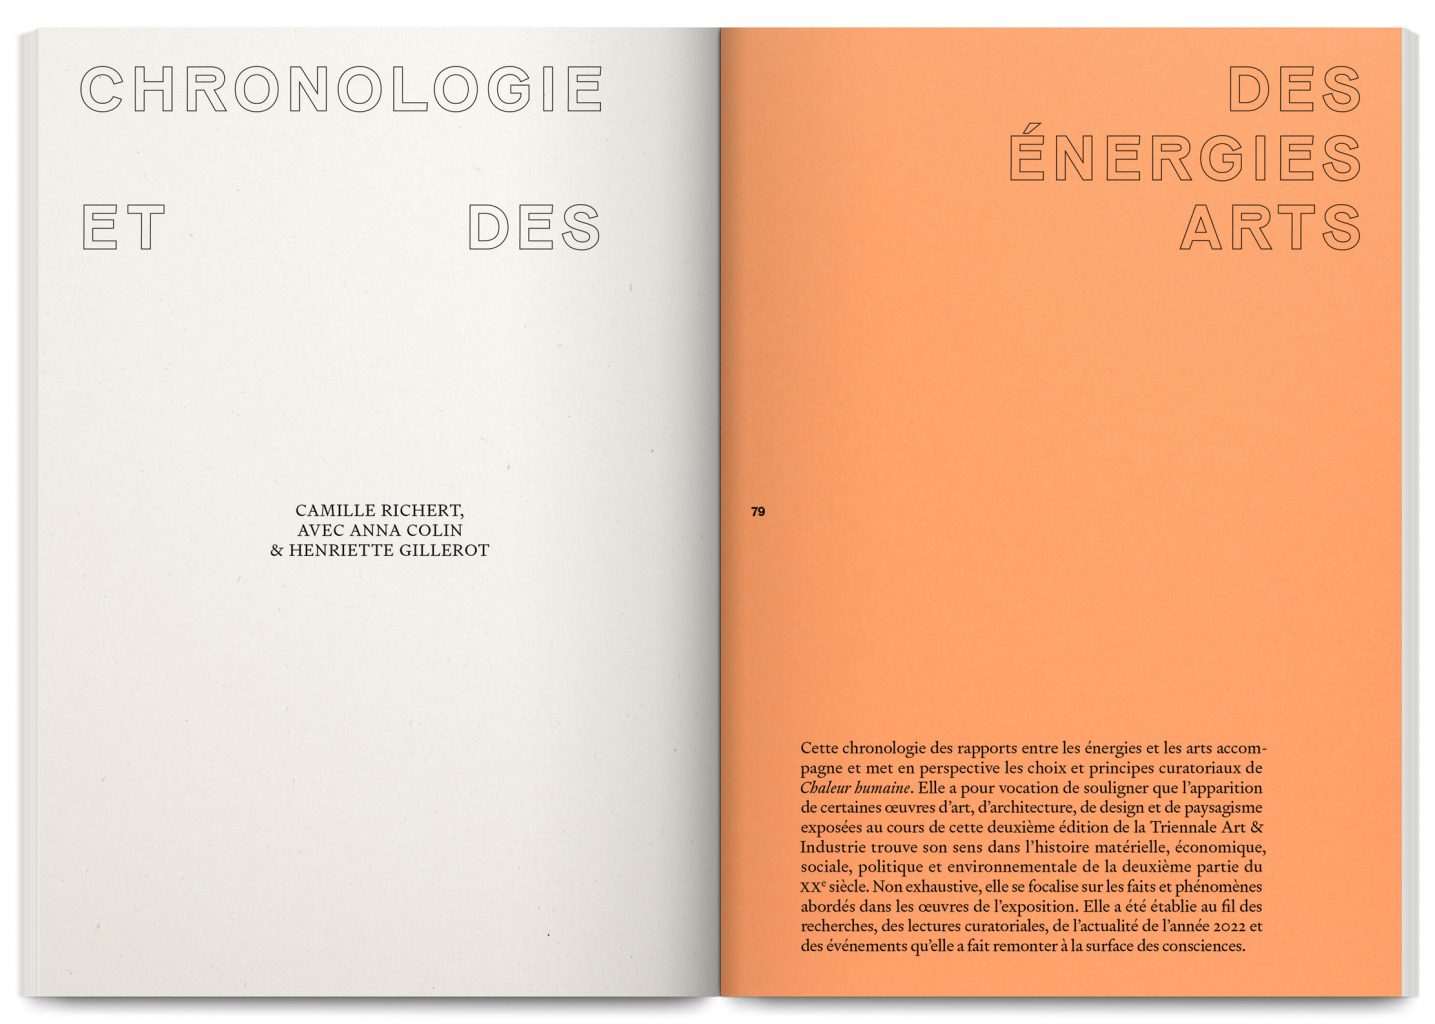 Exhibition catalogue Chaleur Humaine, Triennale Art & Industrie, Dunkerque, North of France, designed by In the shade of a tree studio, founded by Sophie Demay and Maël Fournier Comte, joined by Jimmy Cintero.